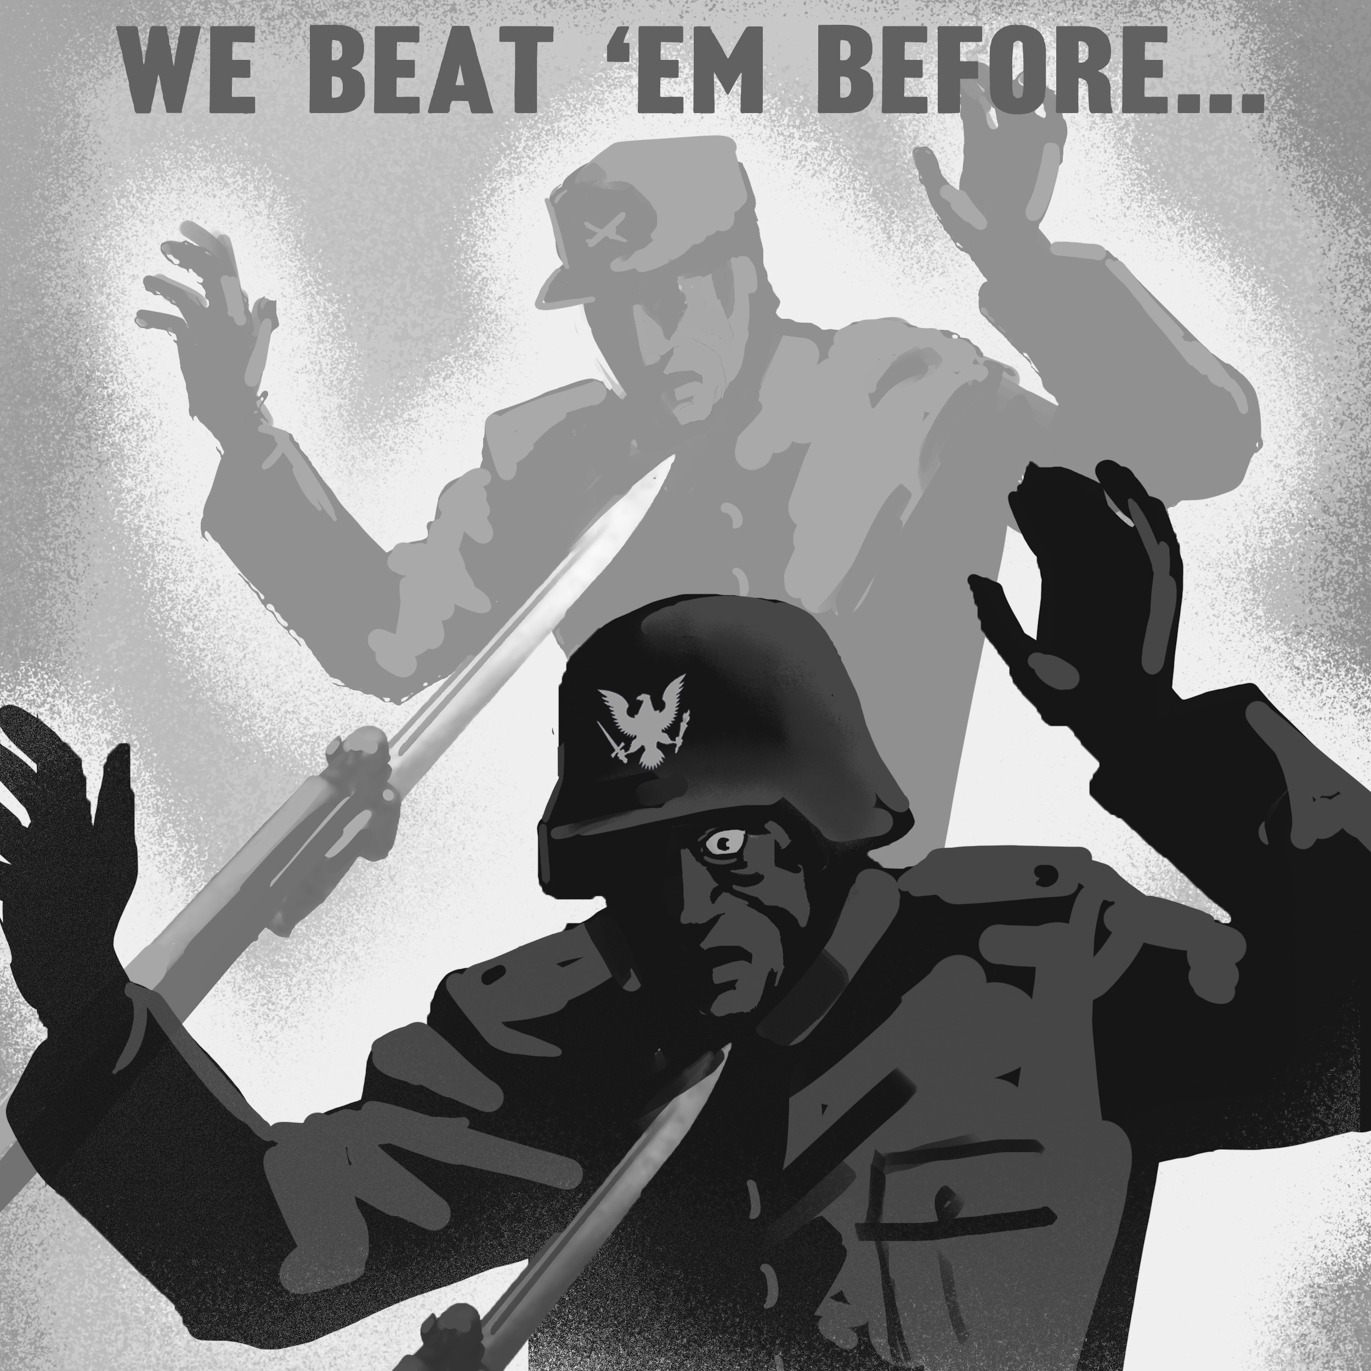 Cat Cinema on Twitter: "We Them Before, We'll Beat Them Again! Another Patreon poster idea, with federalist propaganda likening the struggle against the to the First Civil War. https://t.co/56SDEsP7l2" /